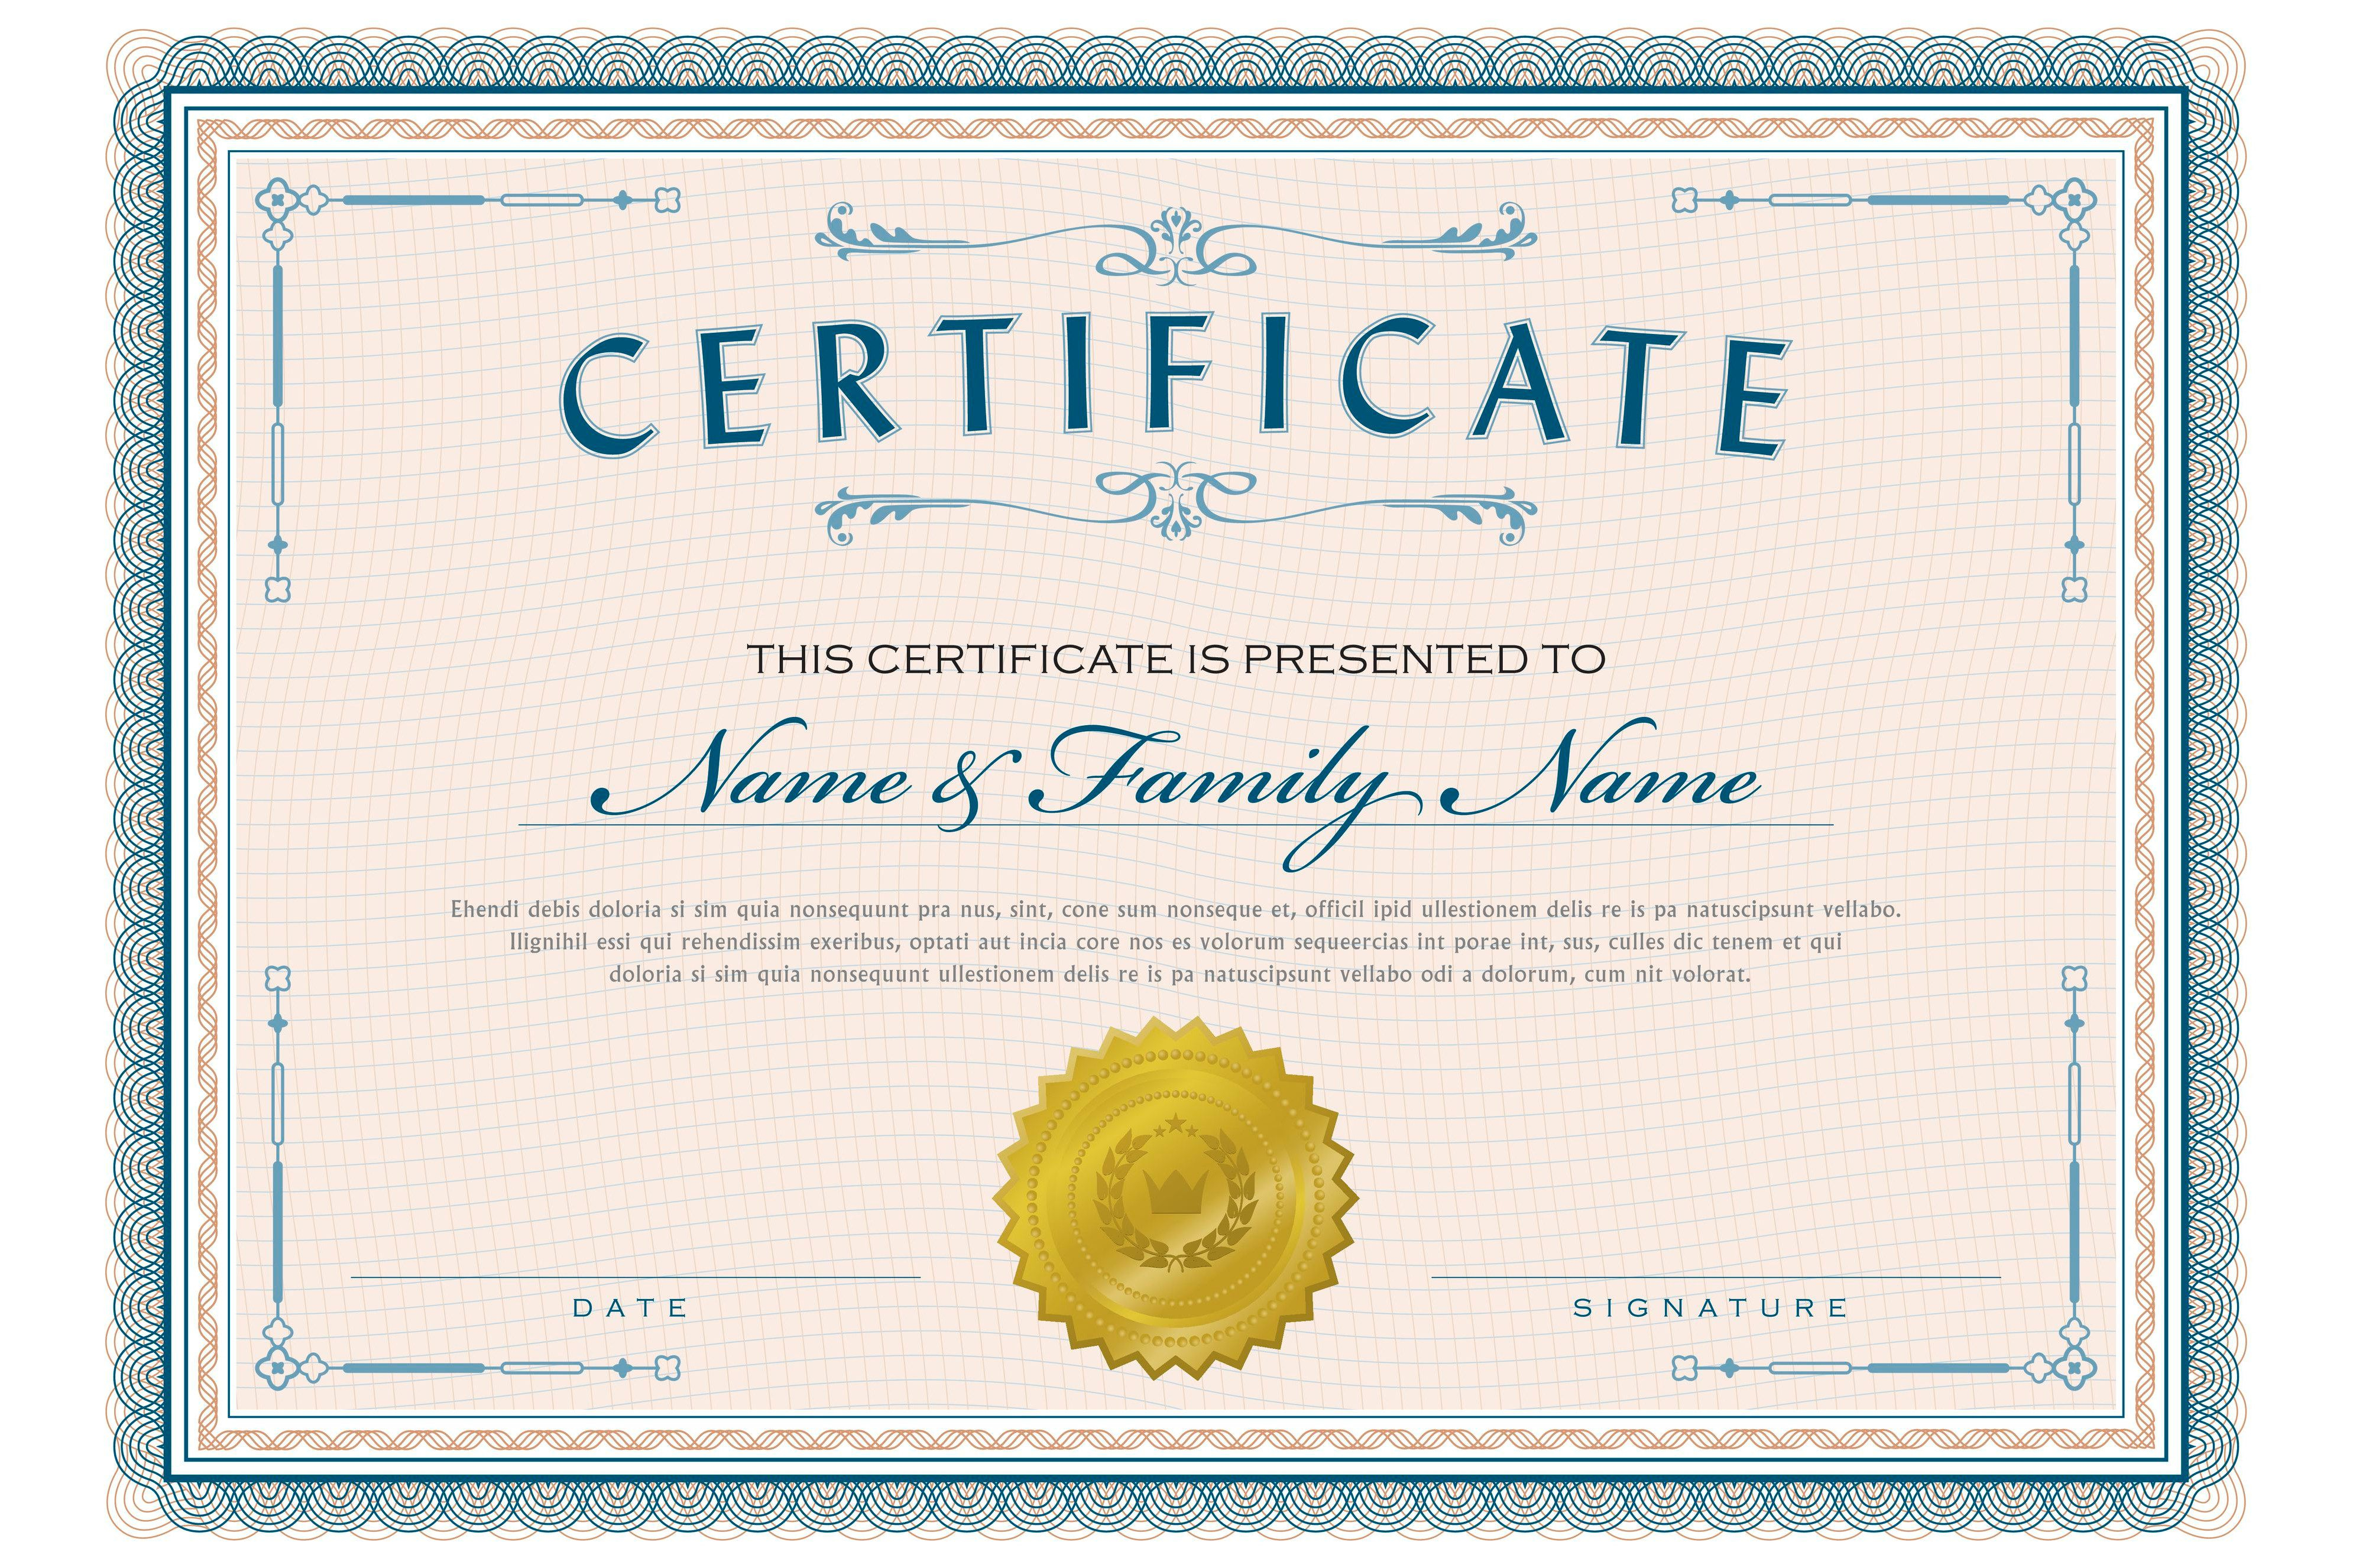 Necessary Parts Of An Award Certificate Within Student Of The Year Award Certificate Templates